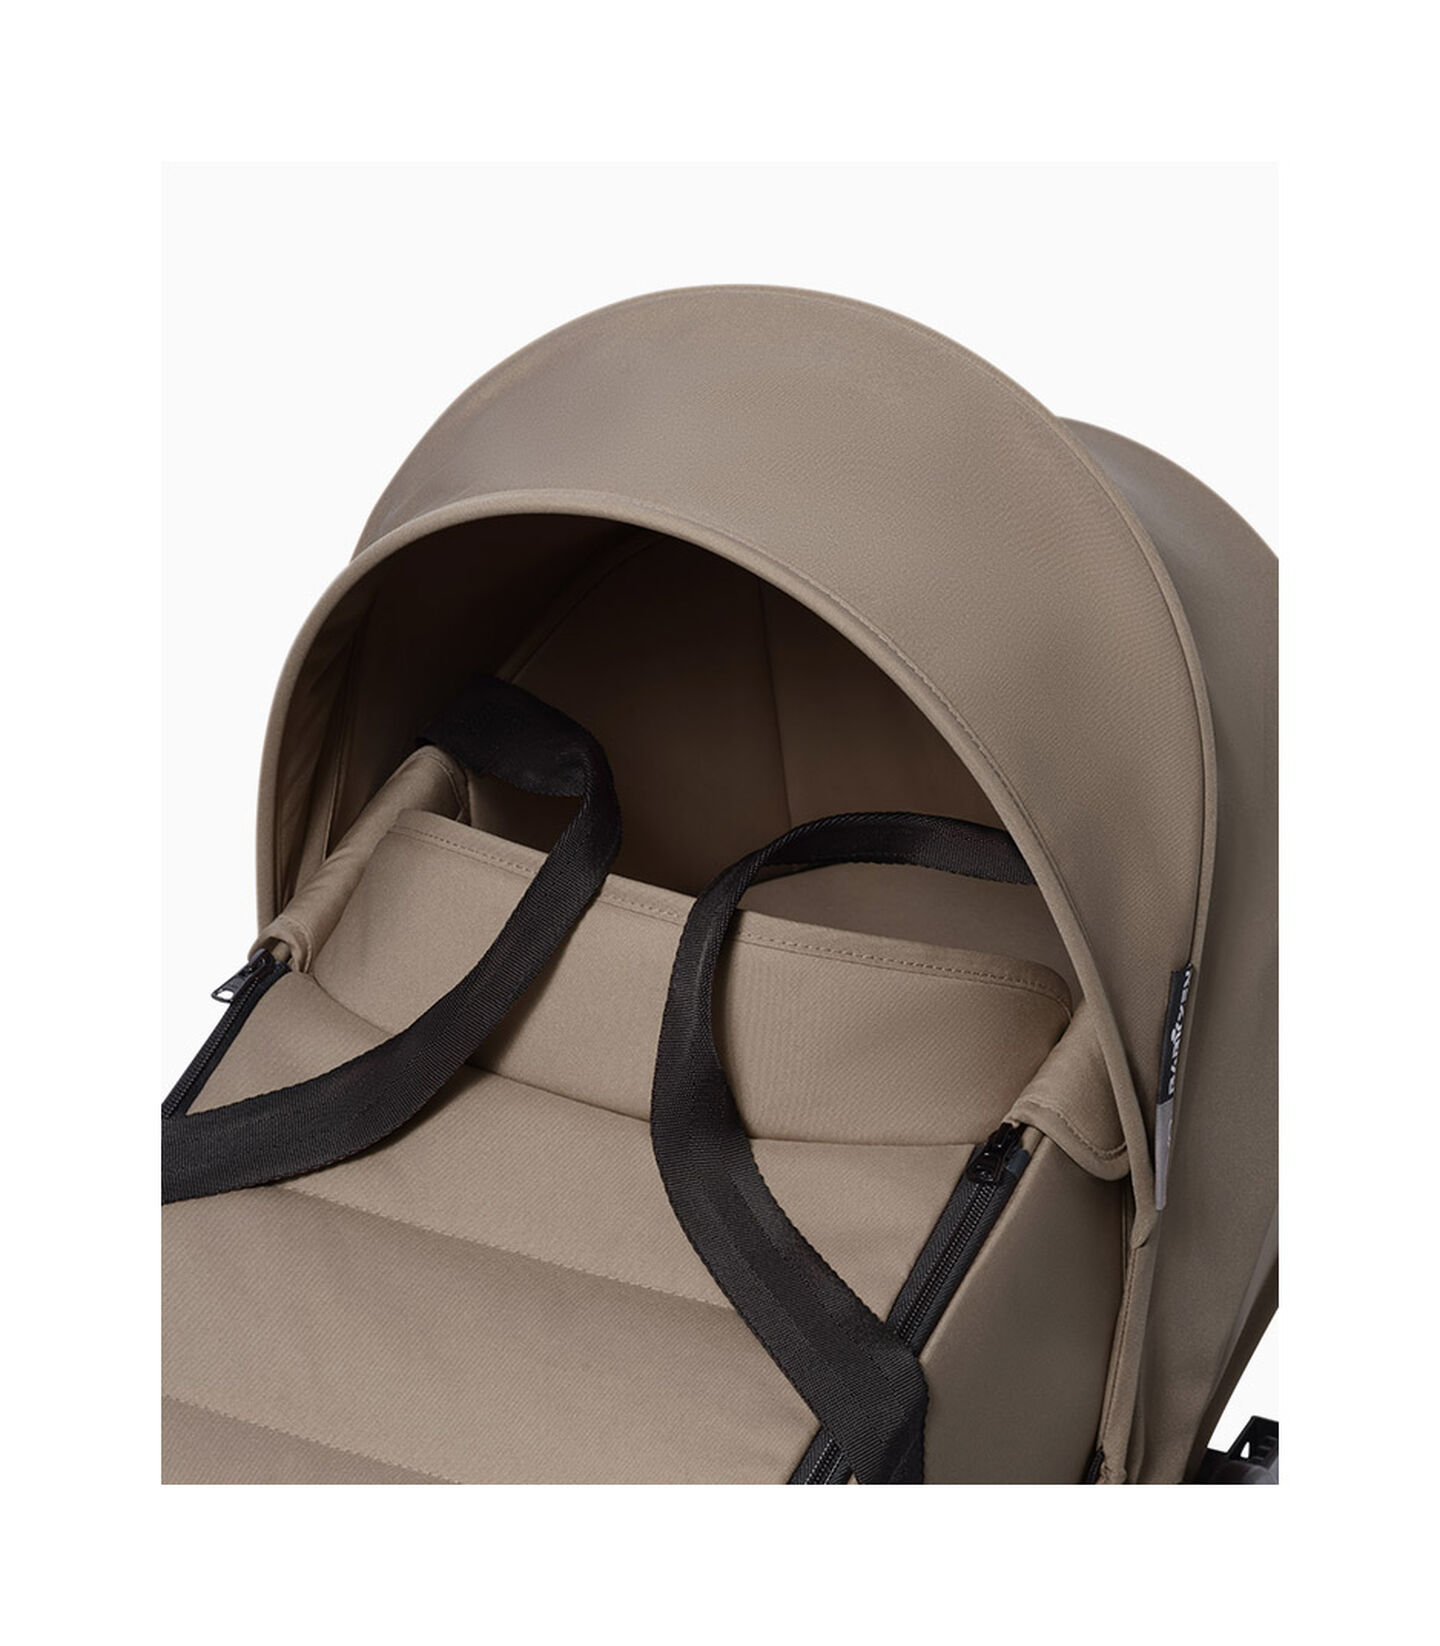 BABYZEN™ YOYO Bassinet - Taupe, Taupe, mainview view 5